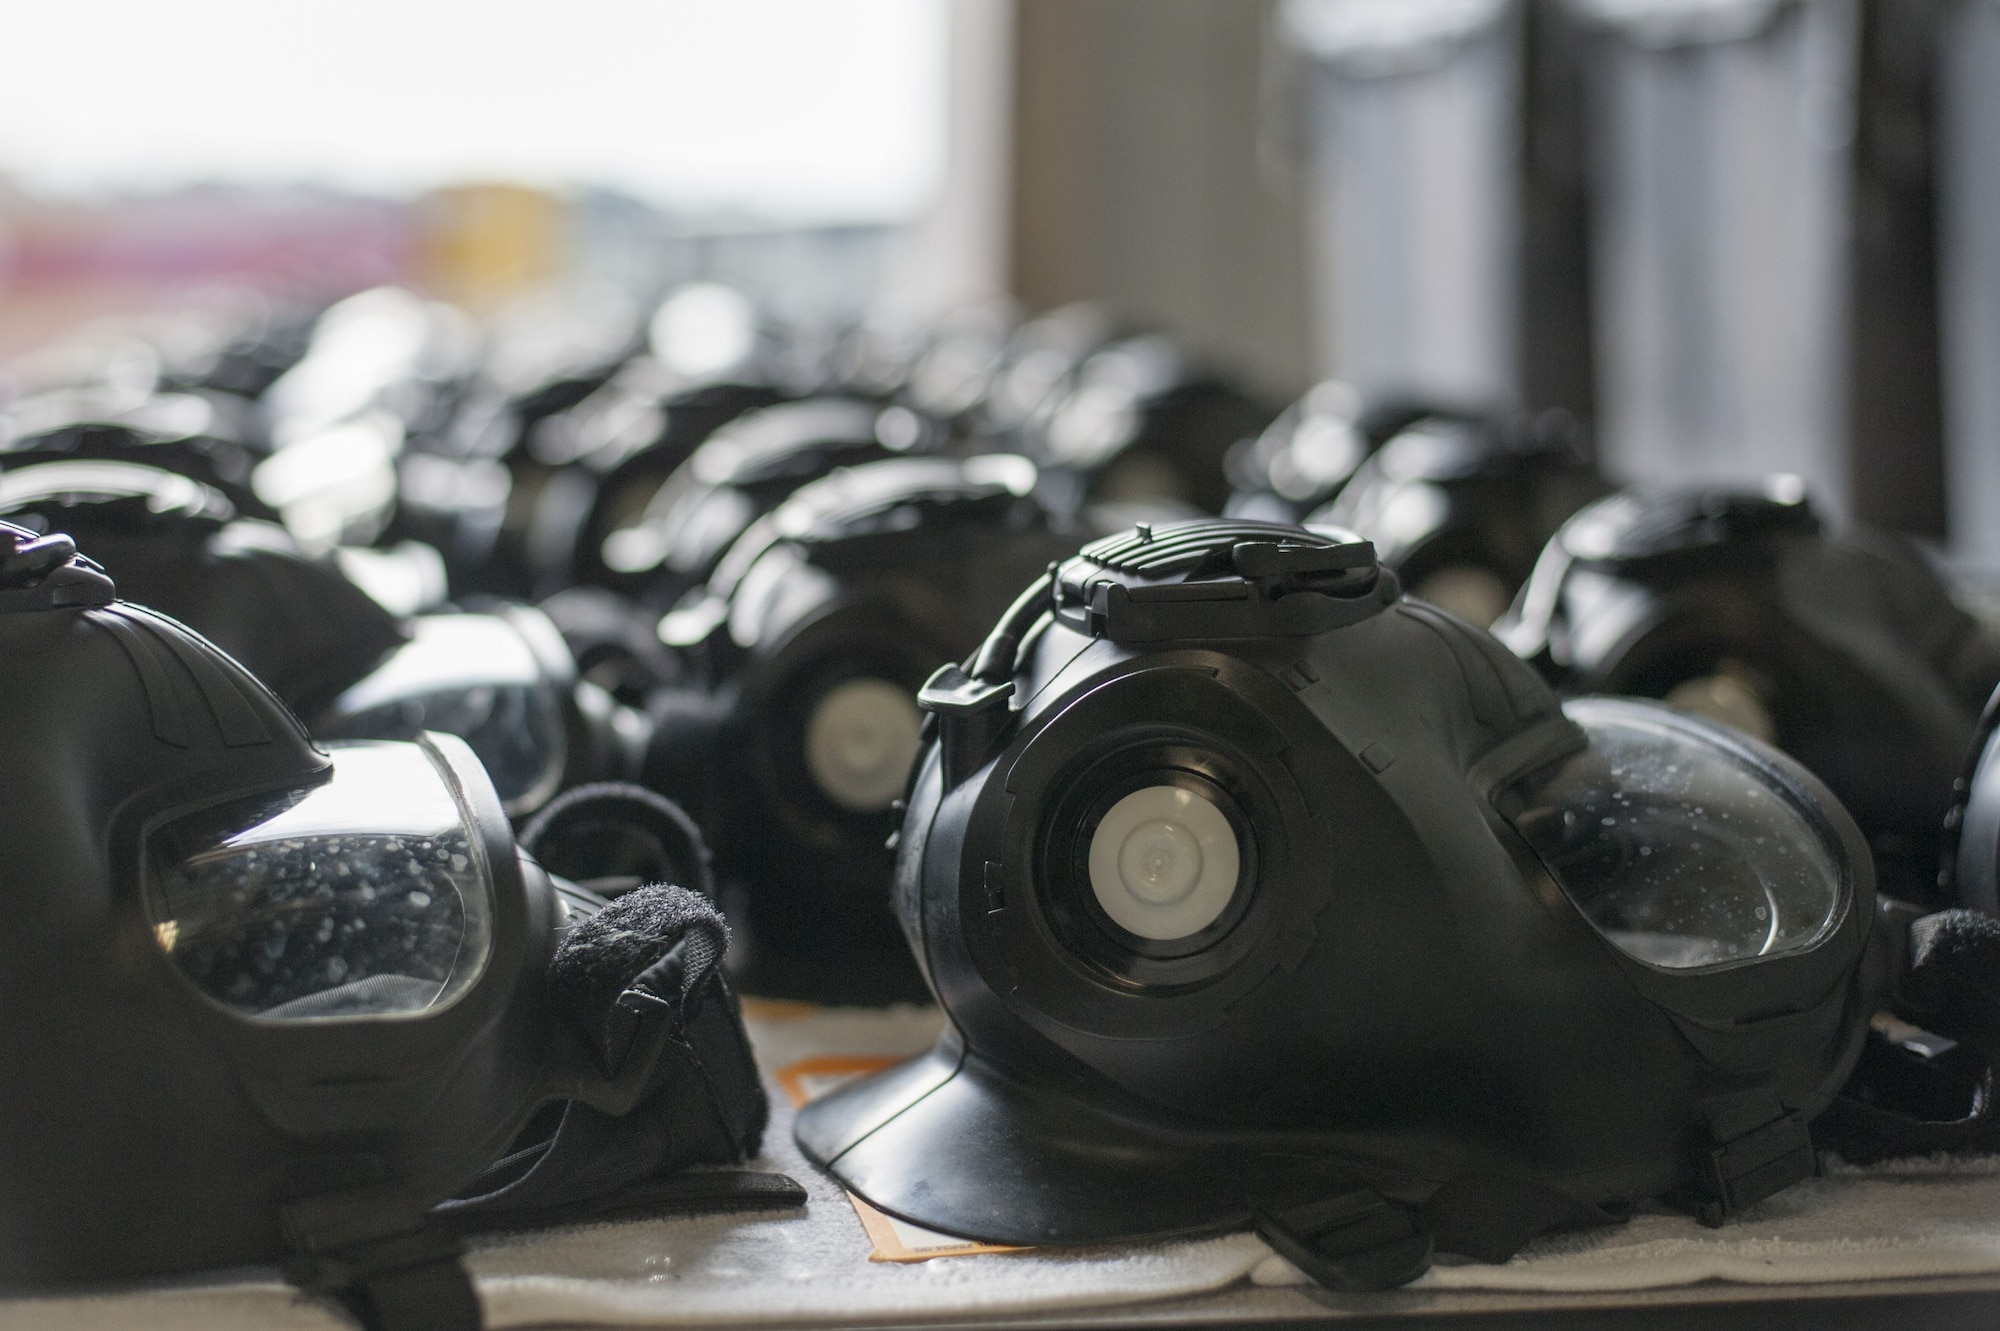 M50 gas masks sit on a table after inspection at MacDill Air Force Base, Fla., Dec. 28, 2017